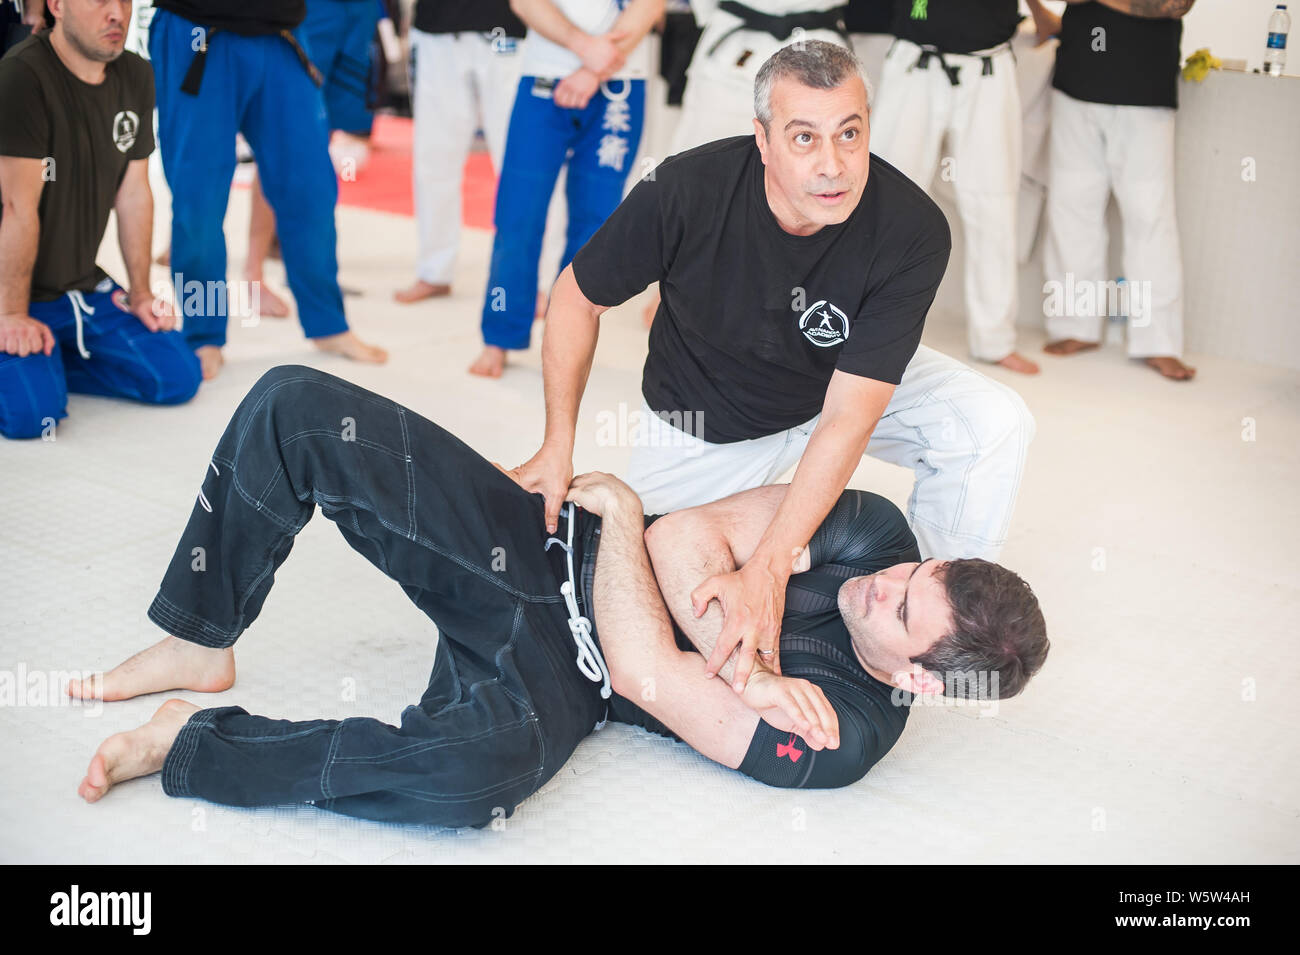 ISTANBUL, TURKEY - Maj 30 - Jun 02. 2019. Kapap instructor Avi Nardia demonstrate street fighting self defence technique with his students on GENERAL Stock Photo